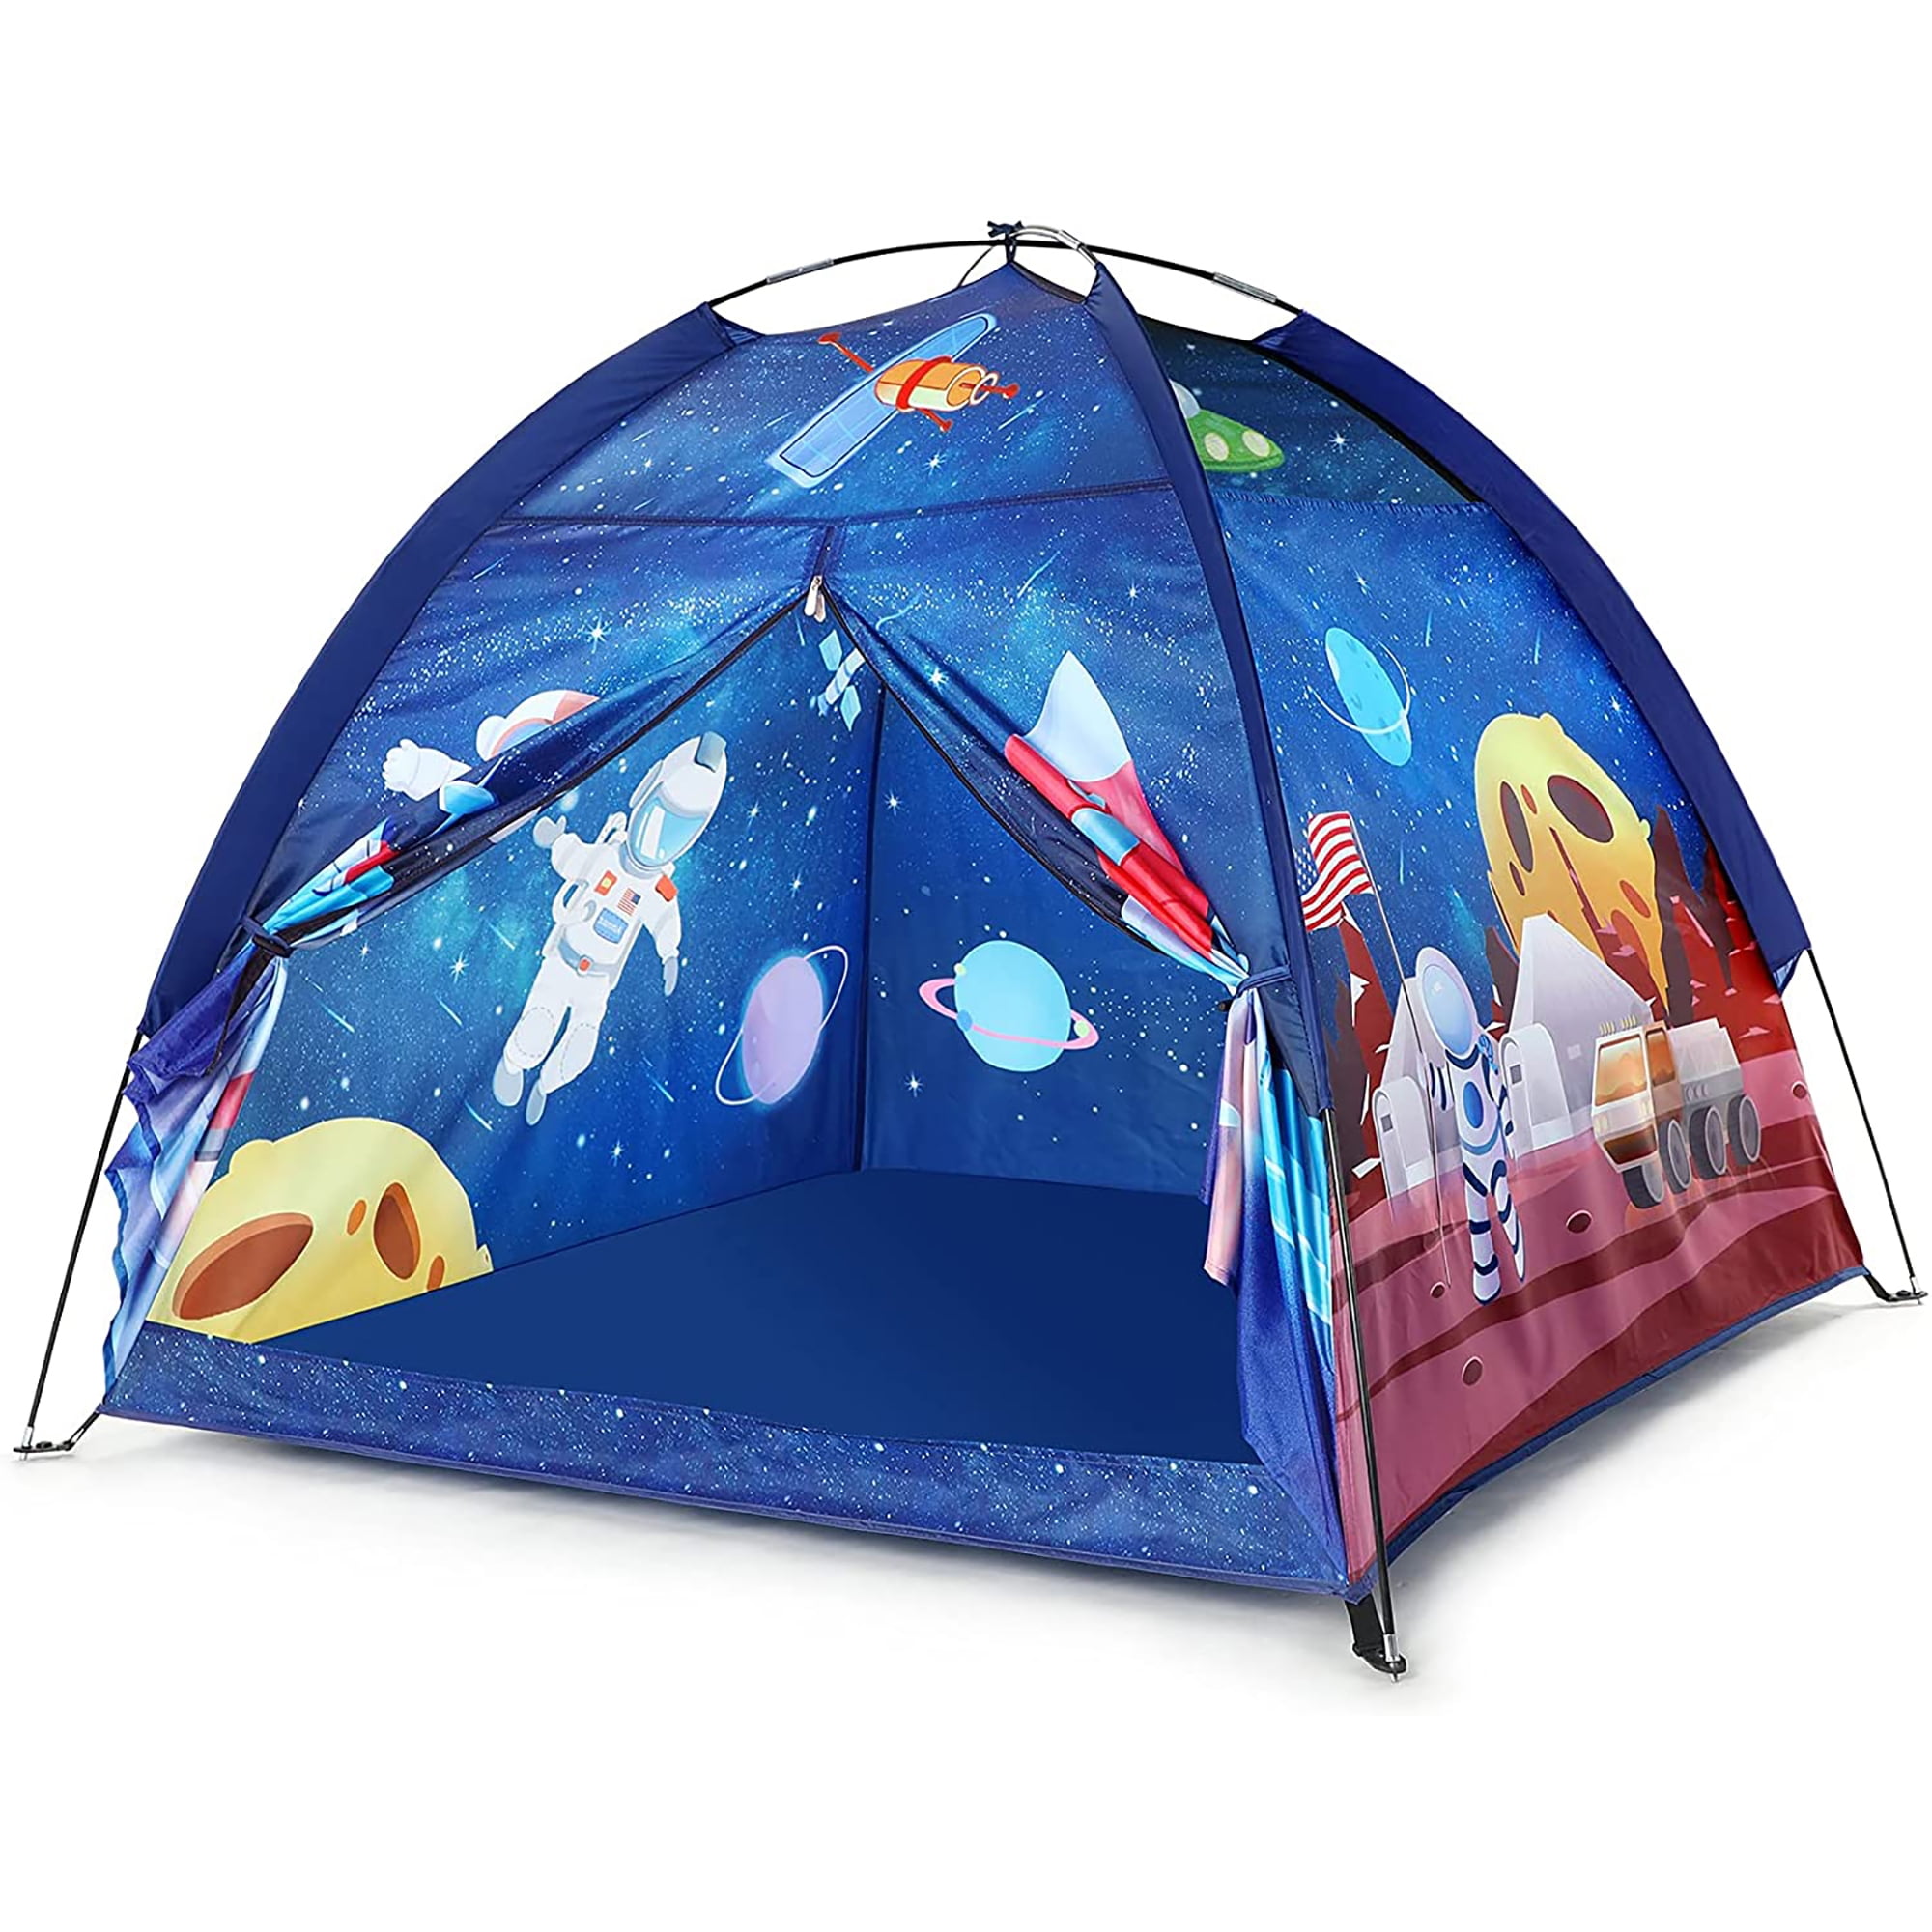 Kids pop up Camping Tent - Bright Colorful Play Tent for Indoor